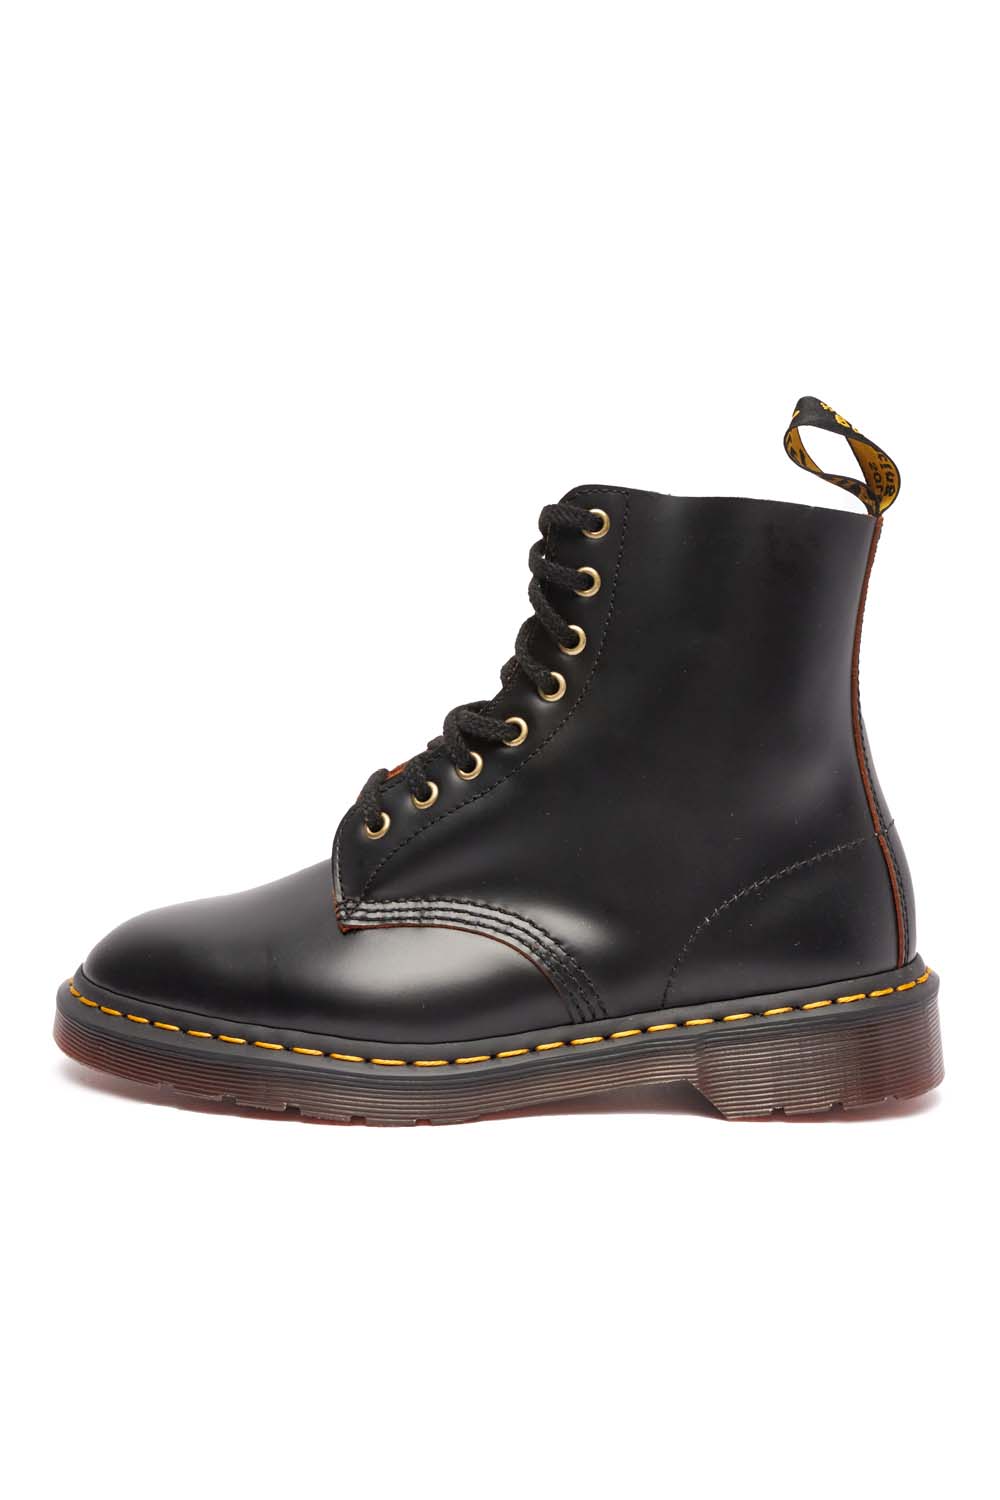 Adiós lote Sandalias Dr Martens Mens 1460 Pascal Shoes 'Black Vintage Smooth' | ROOTED